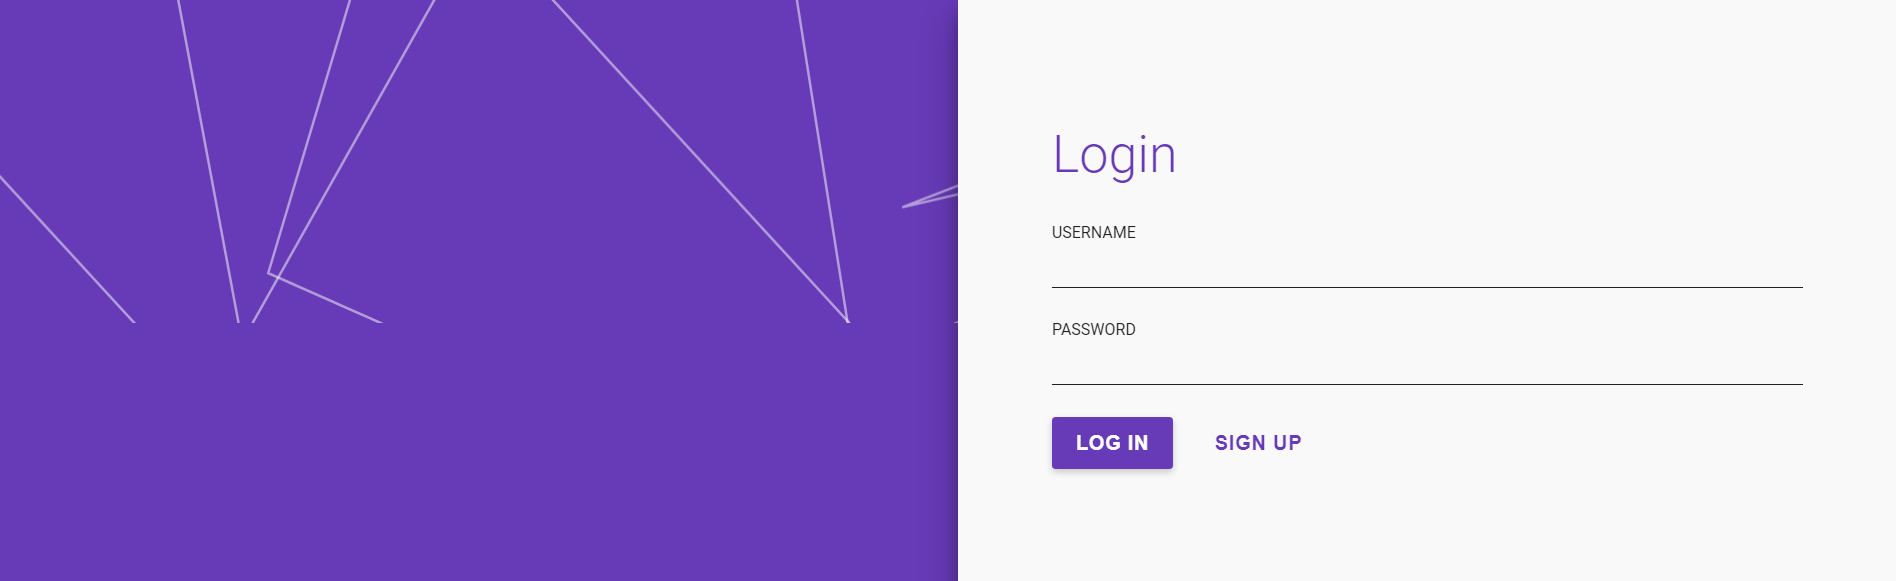 Dynamic Single Page Login and Signup